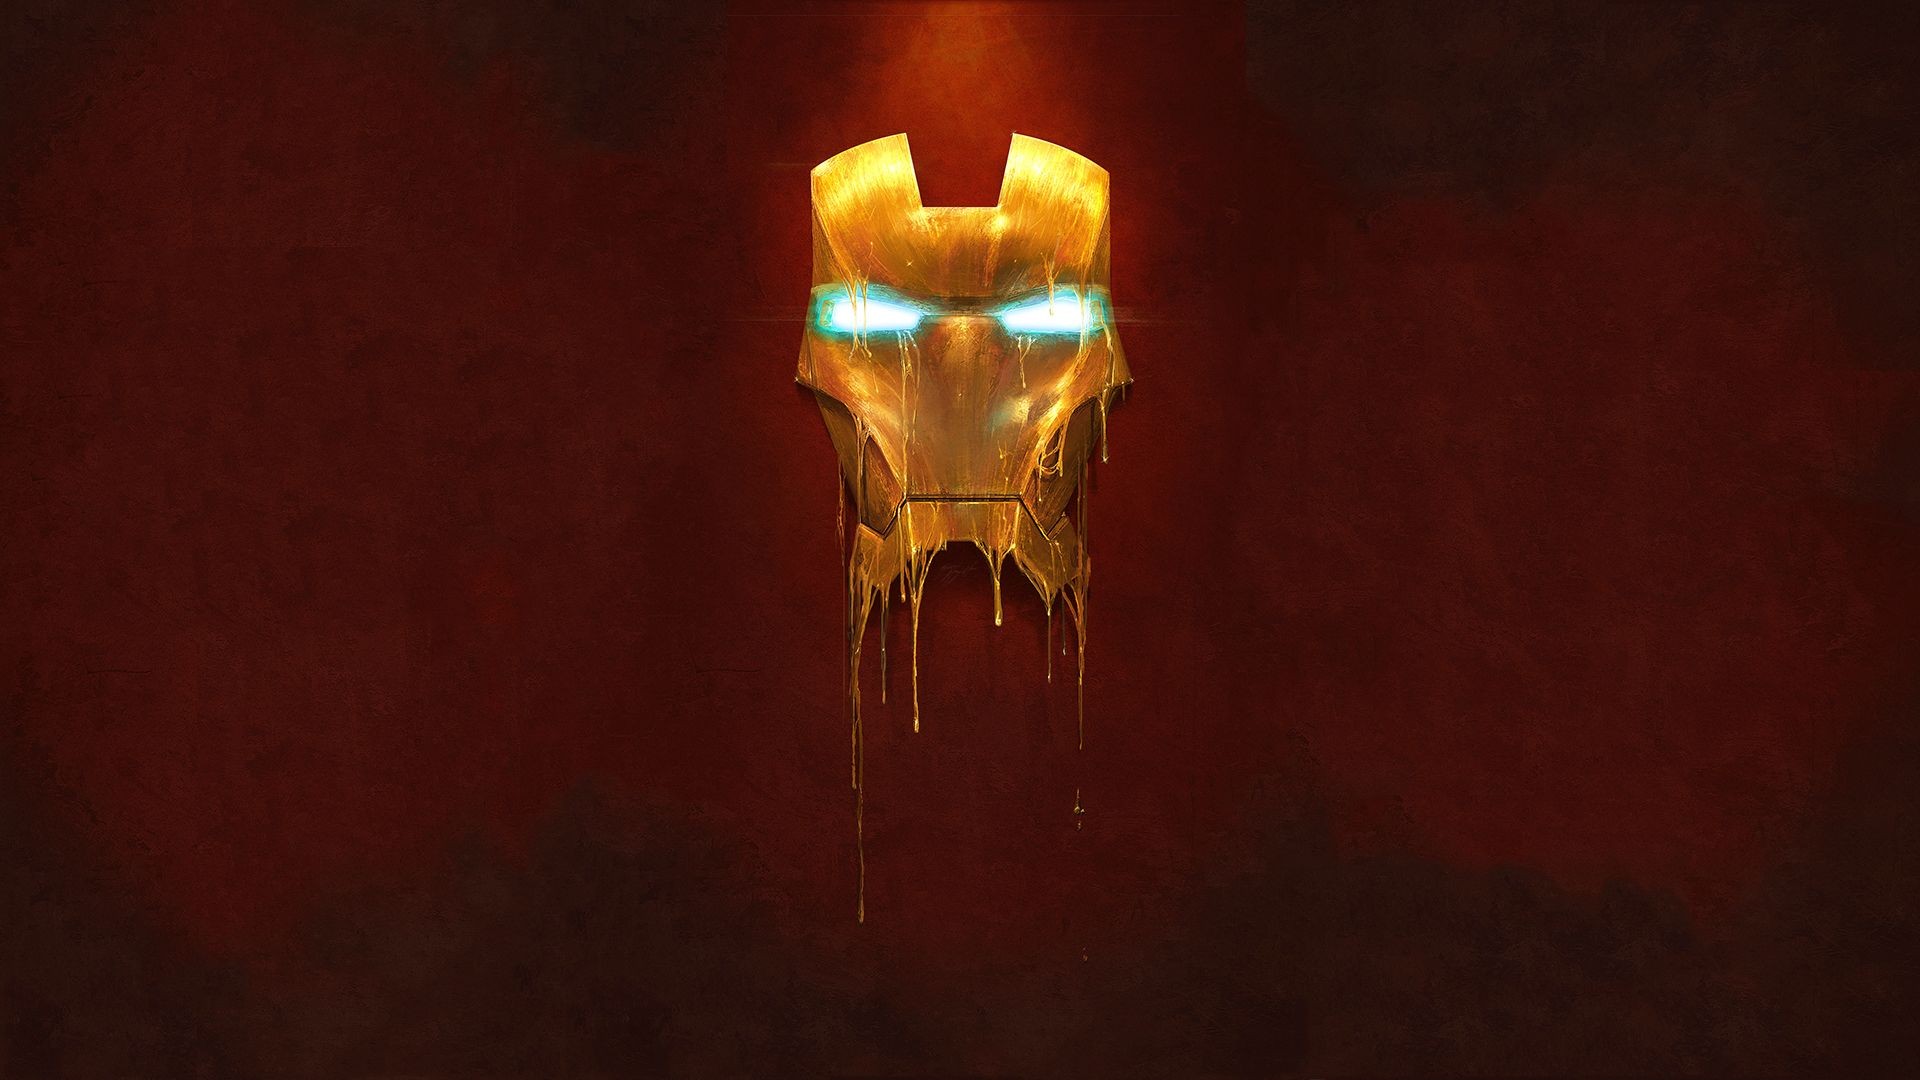  Man 3 in theaters Ive collected some awesome Iron Man wallpapers 1920x1080